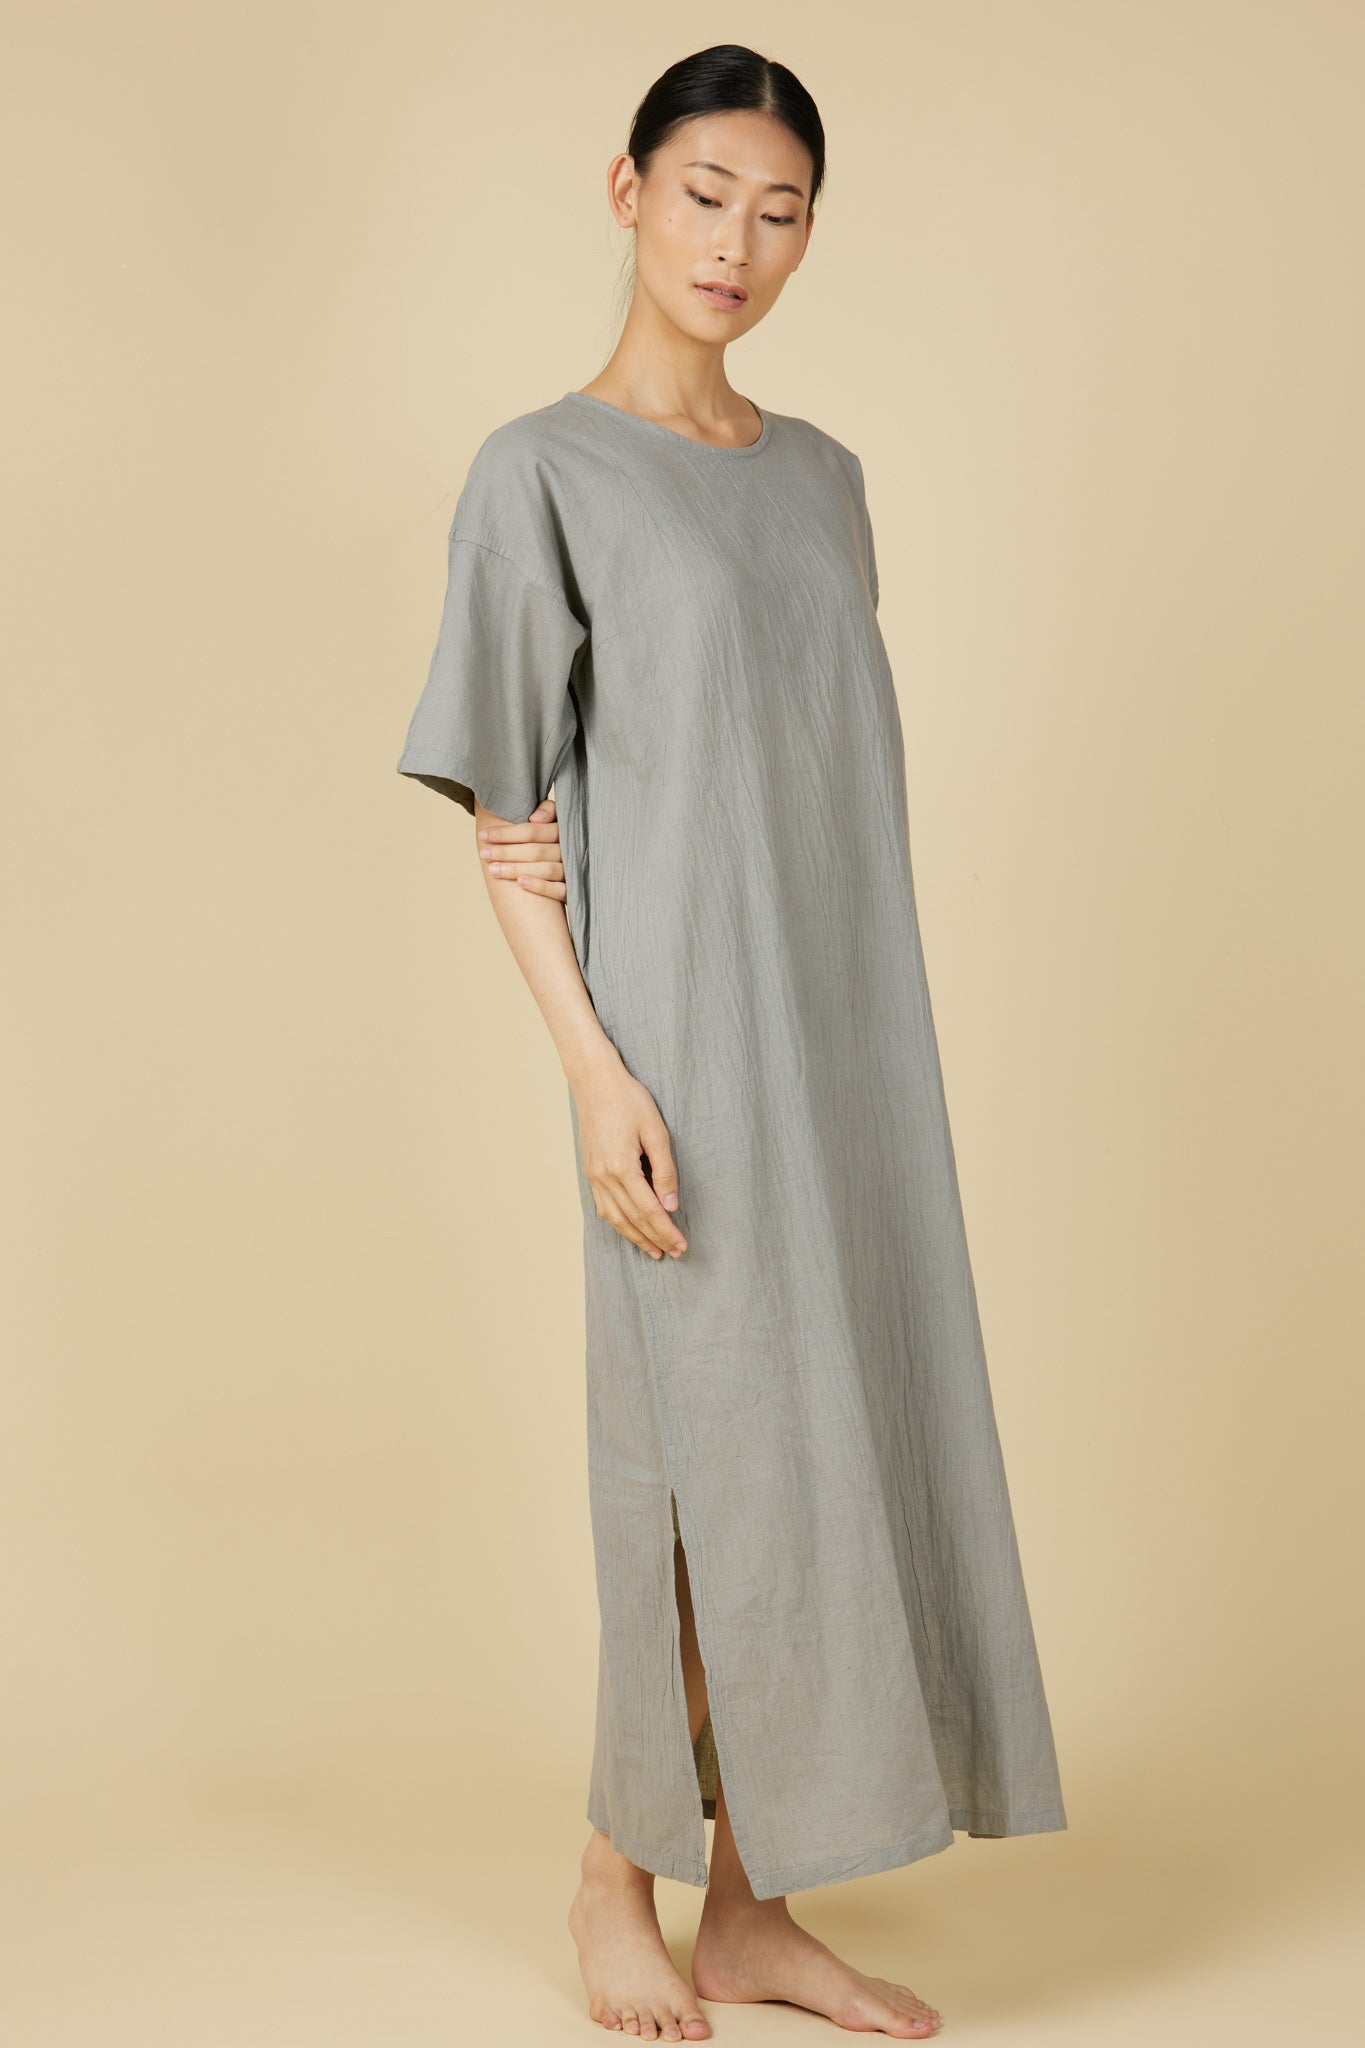 Hand Dyed Short Sleeve Dress in Light Grey